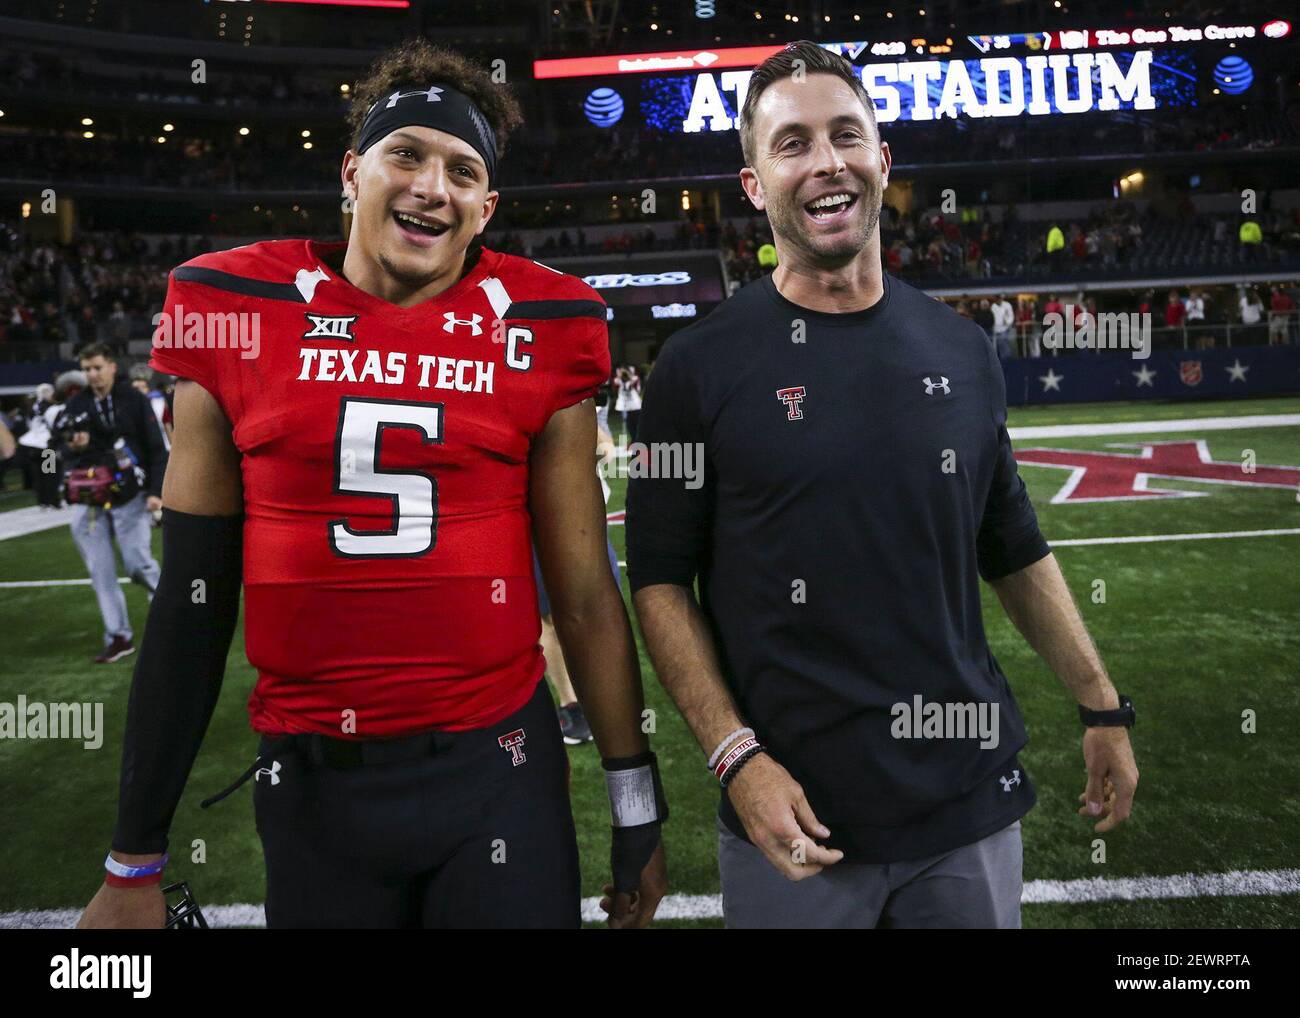 Texas Tech quarterback Patrick Mahomes II (5) and head coach Kliff Kingsbury walk off the field after after a 54-35 win against Baylor at AT&T Stadium in Arlington, Texas, on Nov. 25, 2016. (Photo by Richard W. Rodriguez/Fort Worth Star-Telegram/TNS/Sipa USA) Stock Photo